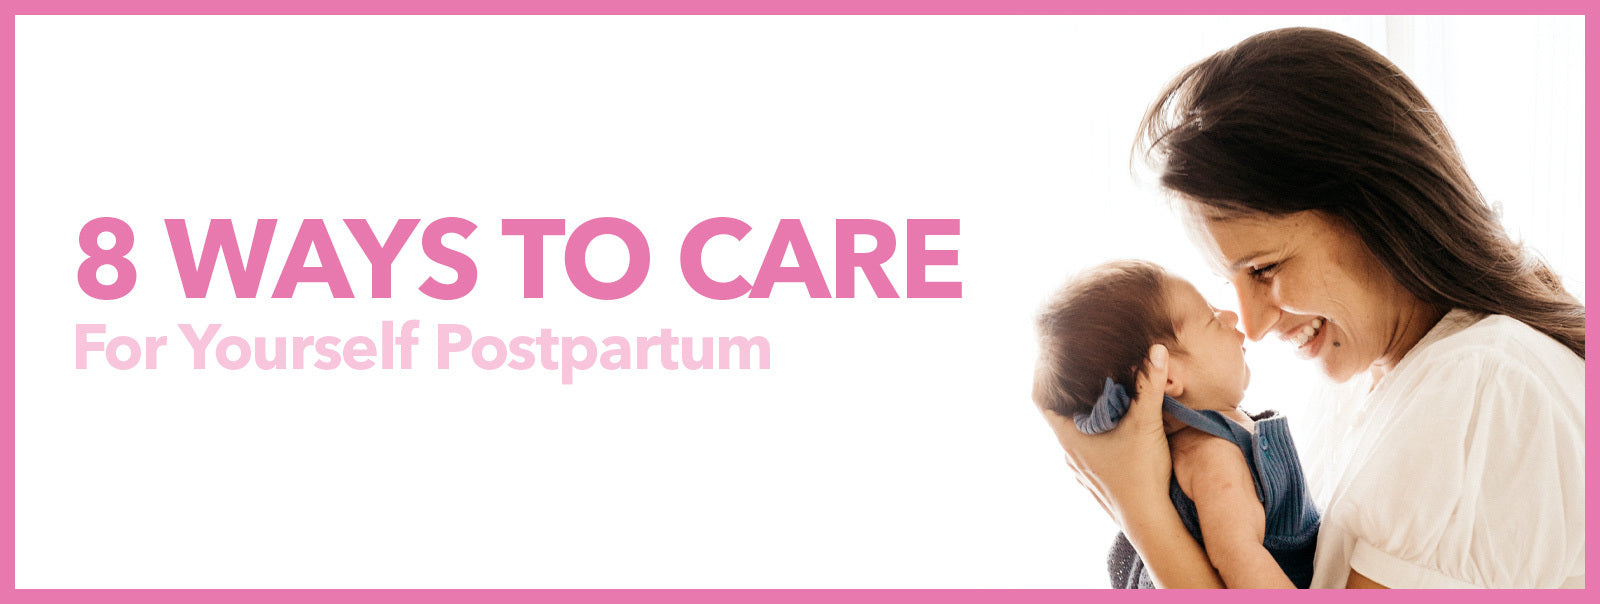 6 Ways to Care for Yourself Postpartum